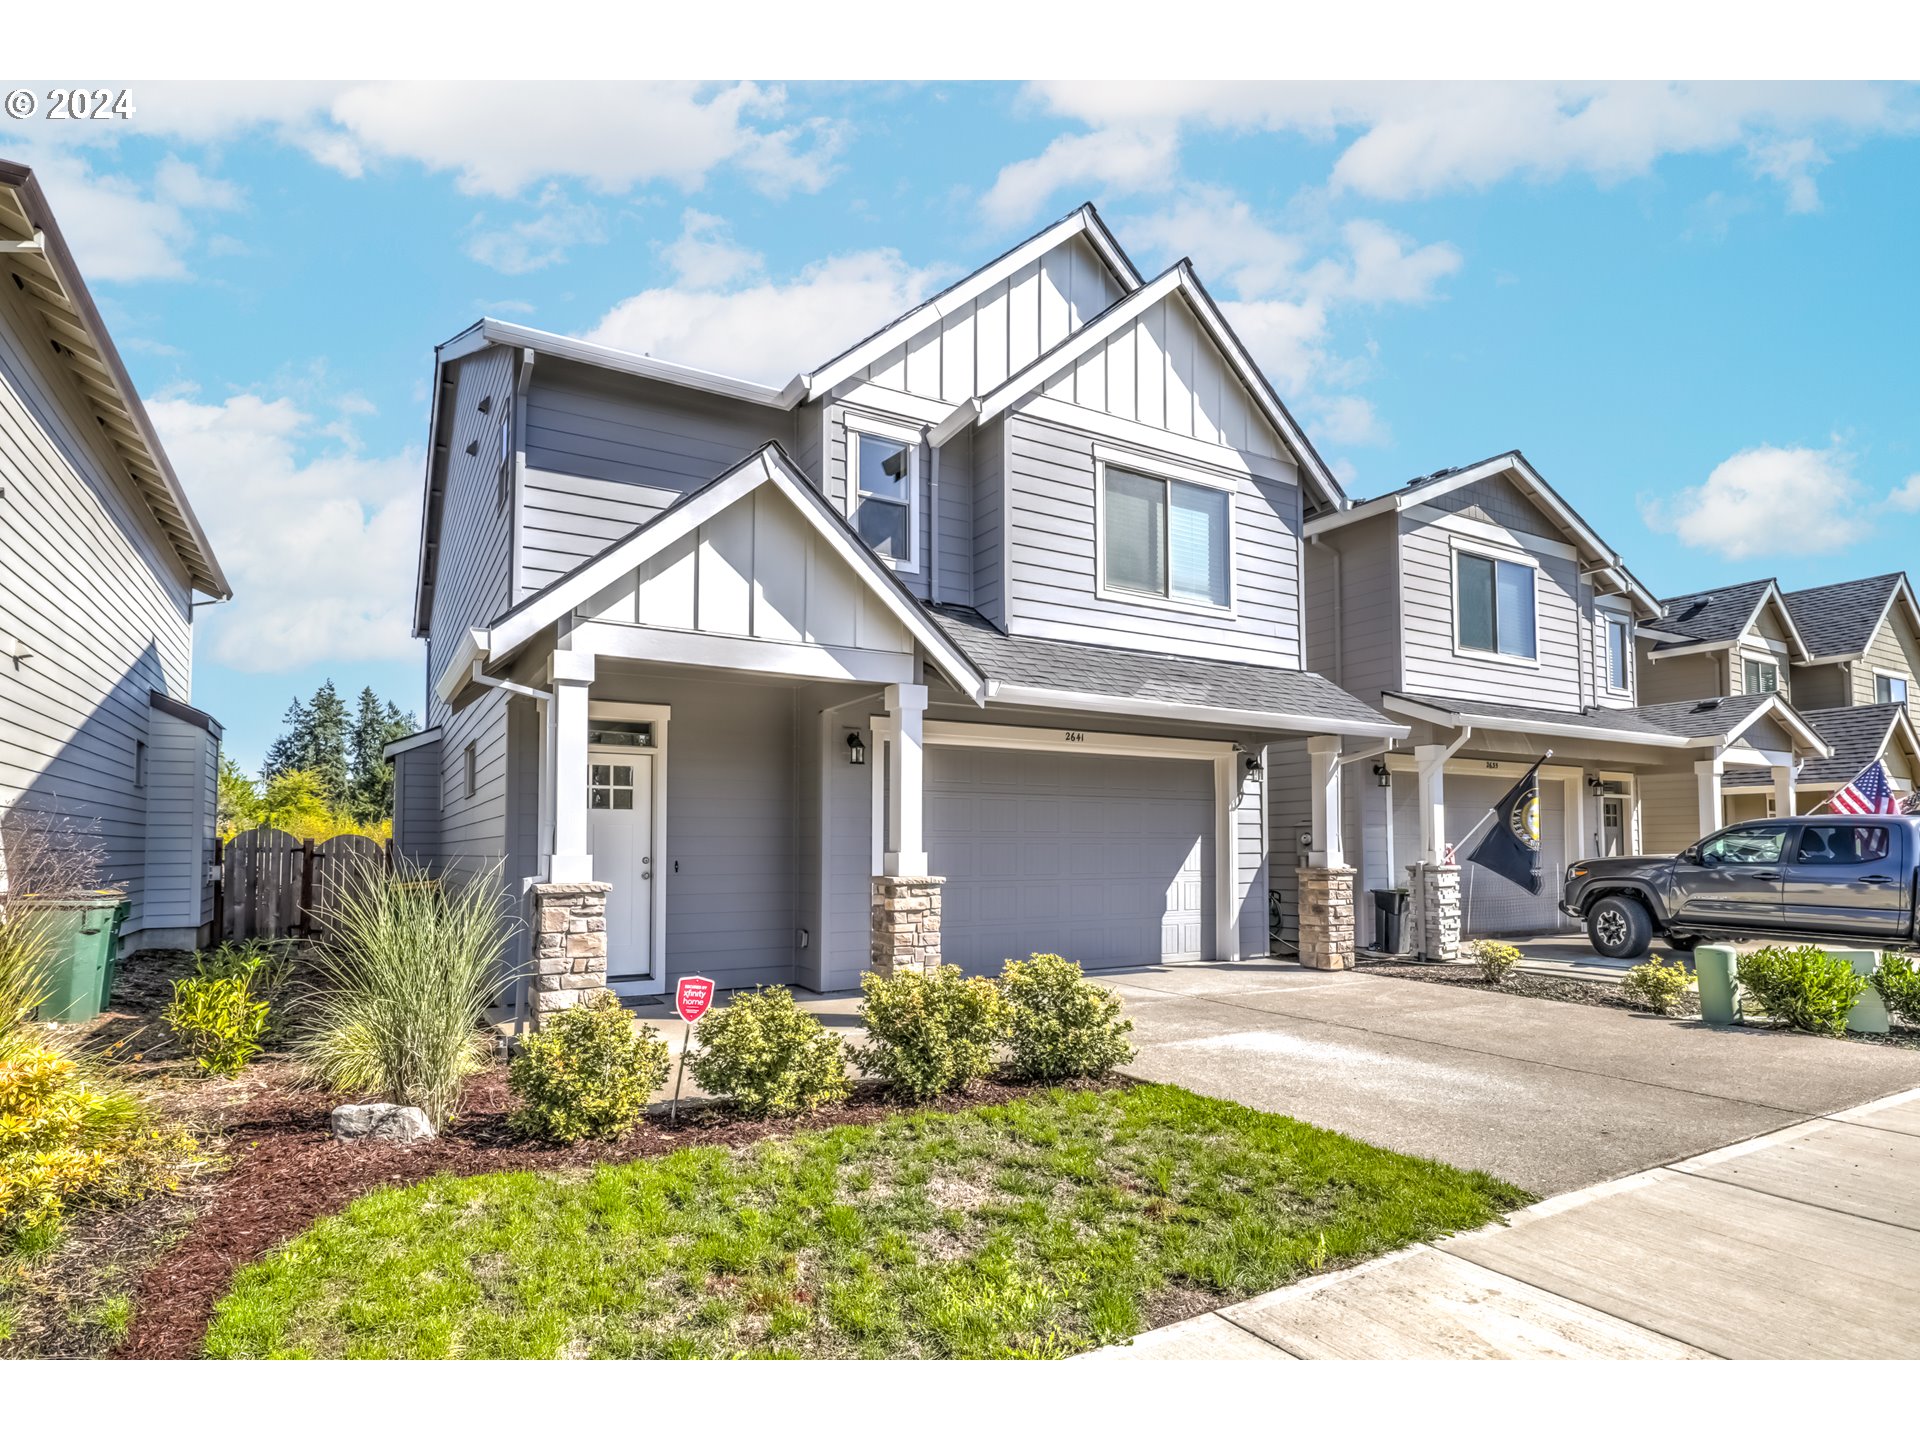 2641 DOUGLAS ST, Forest Grove, OR 